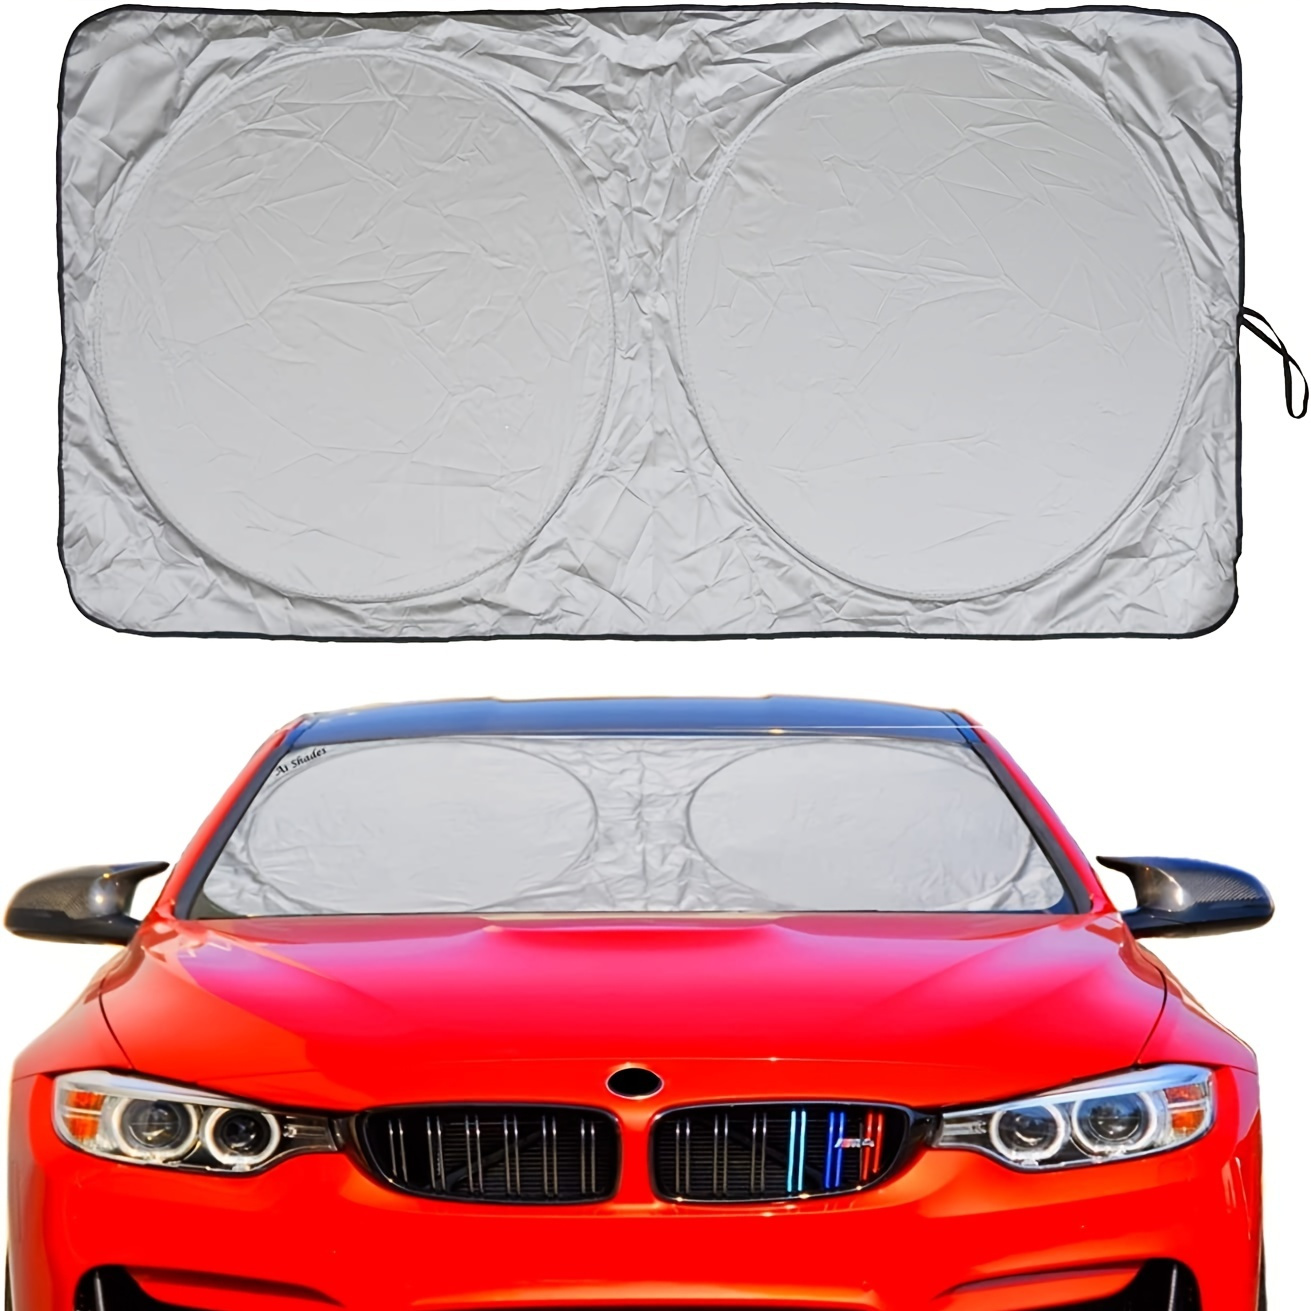 Protect Your Car From The Sun's Rays With This Automotive Windshield  Sunshade - Fits SUVs, Minivans, And Trucks!